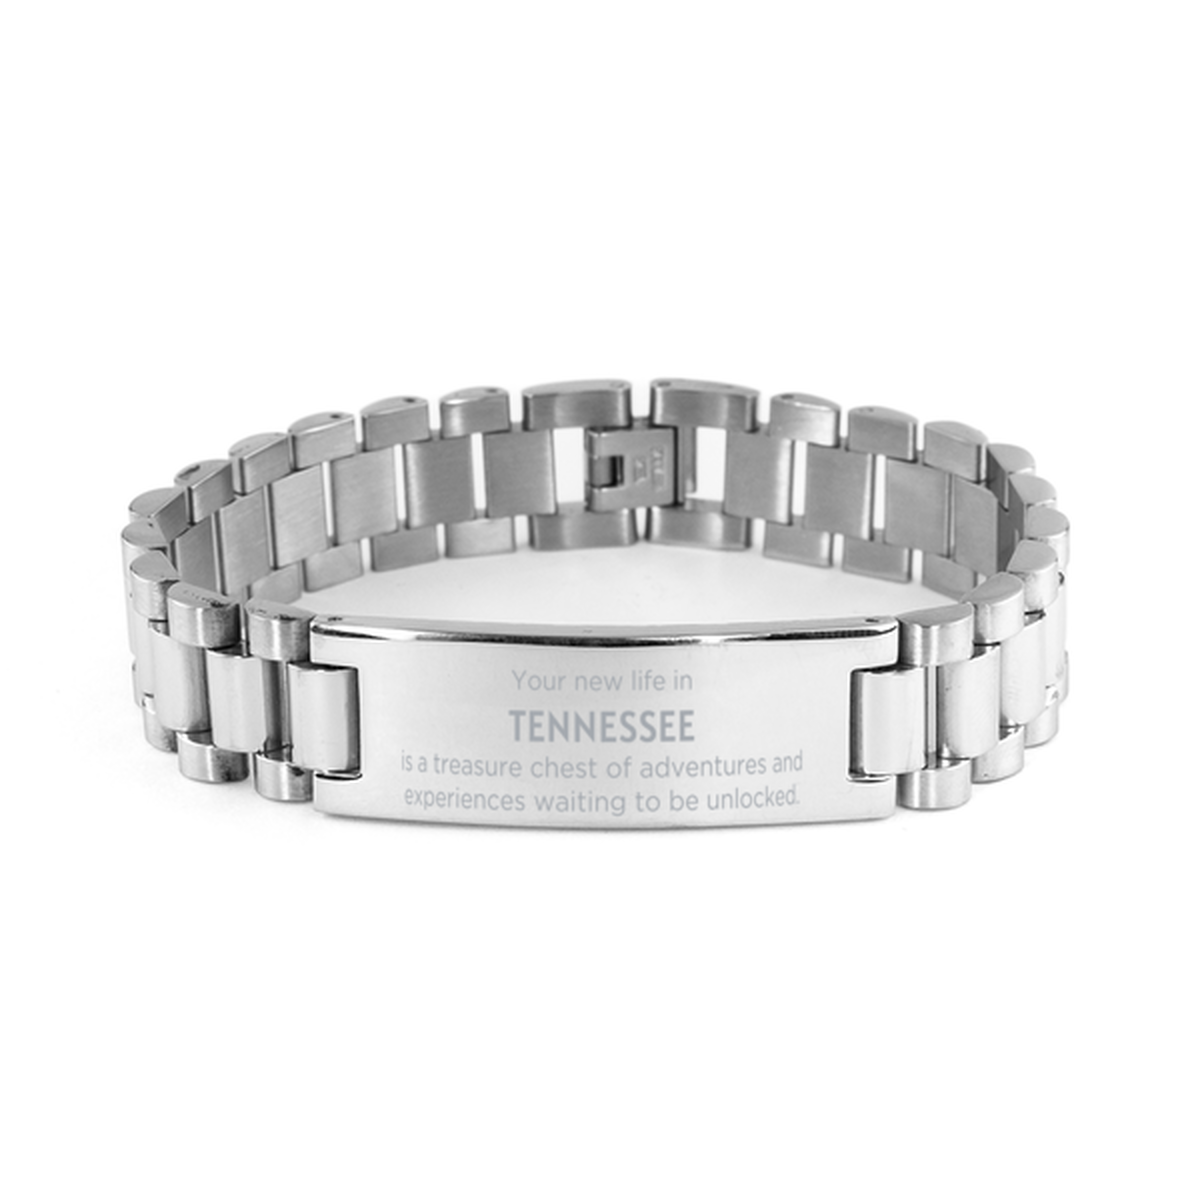 Moving to Tennessee Gifts, Your new life in Tennessee, Long Distance Tennessee Christmas Ladder Stainless Steel Bracelet For Men, Women, Friends, Coworkers